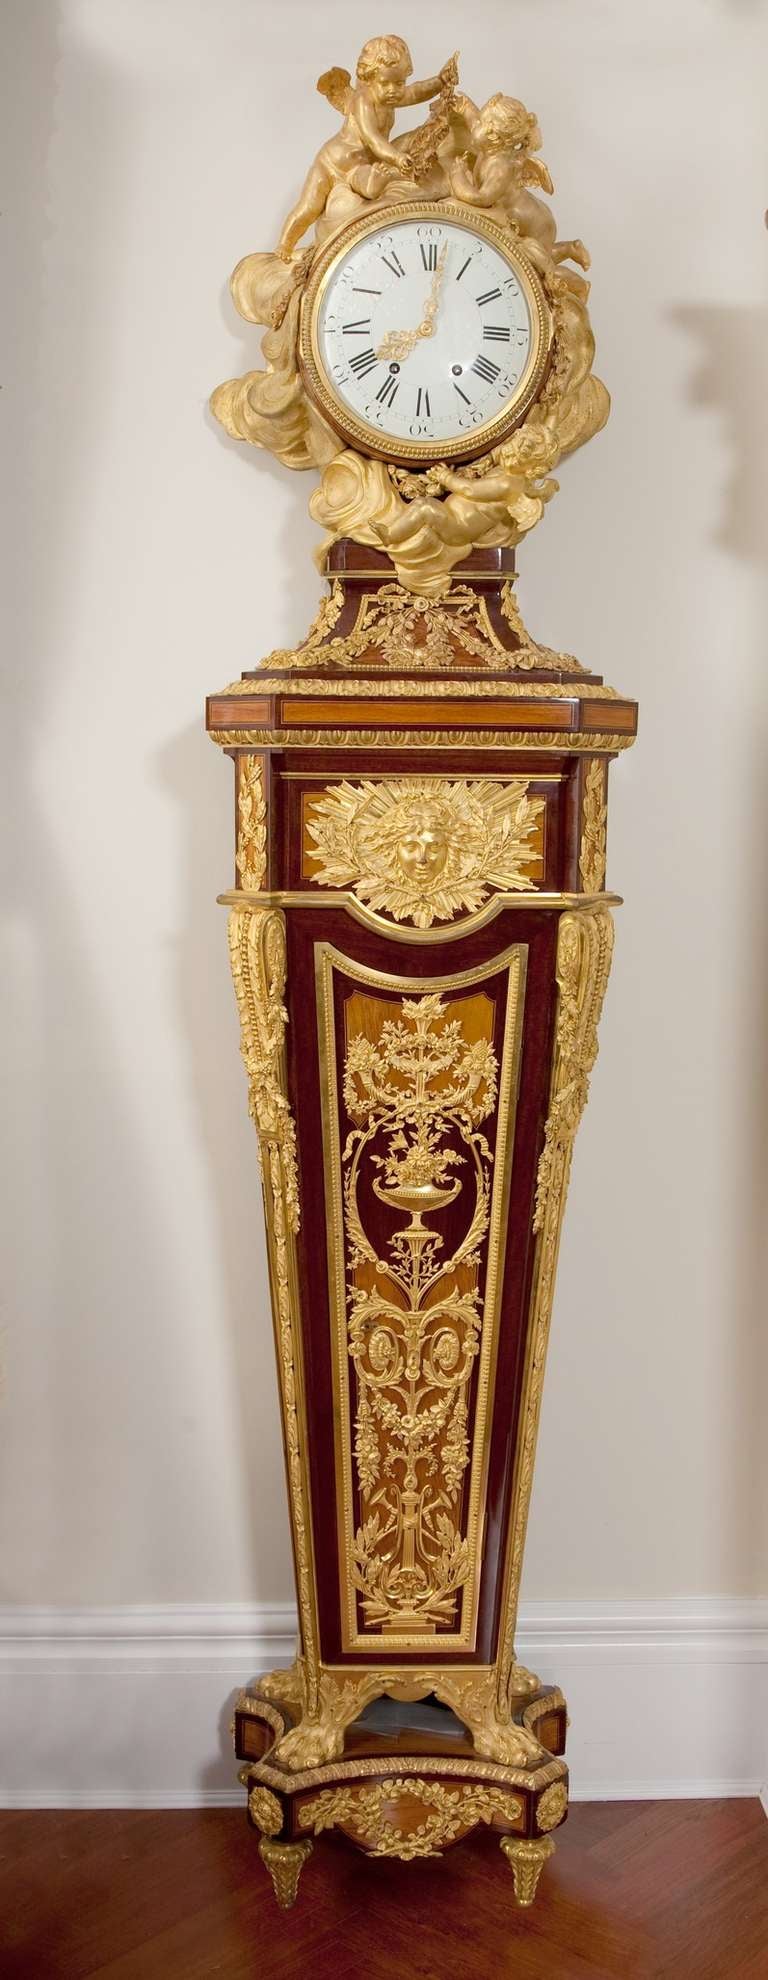 The 'regulateur de parquet' is a copy of the model attributed to Jean-Henri Riesener (received Master in 1785), and now in the permanent collection of the Musee de Louvre.  This was one of the 18th century models admired by the finest cabinetmakers